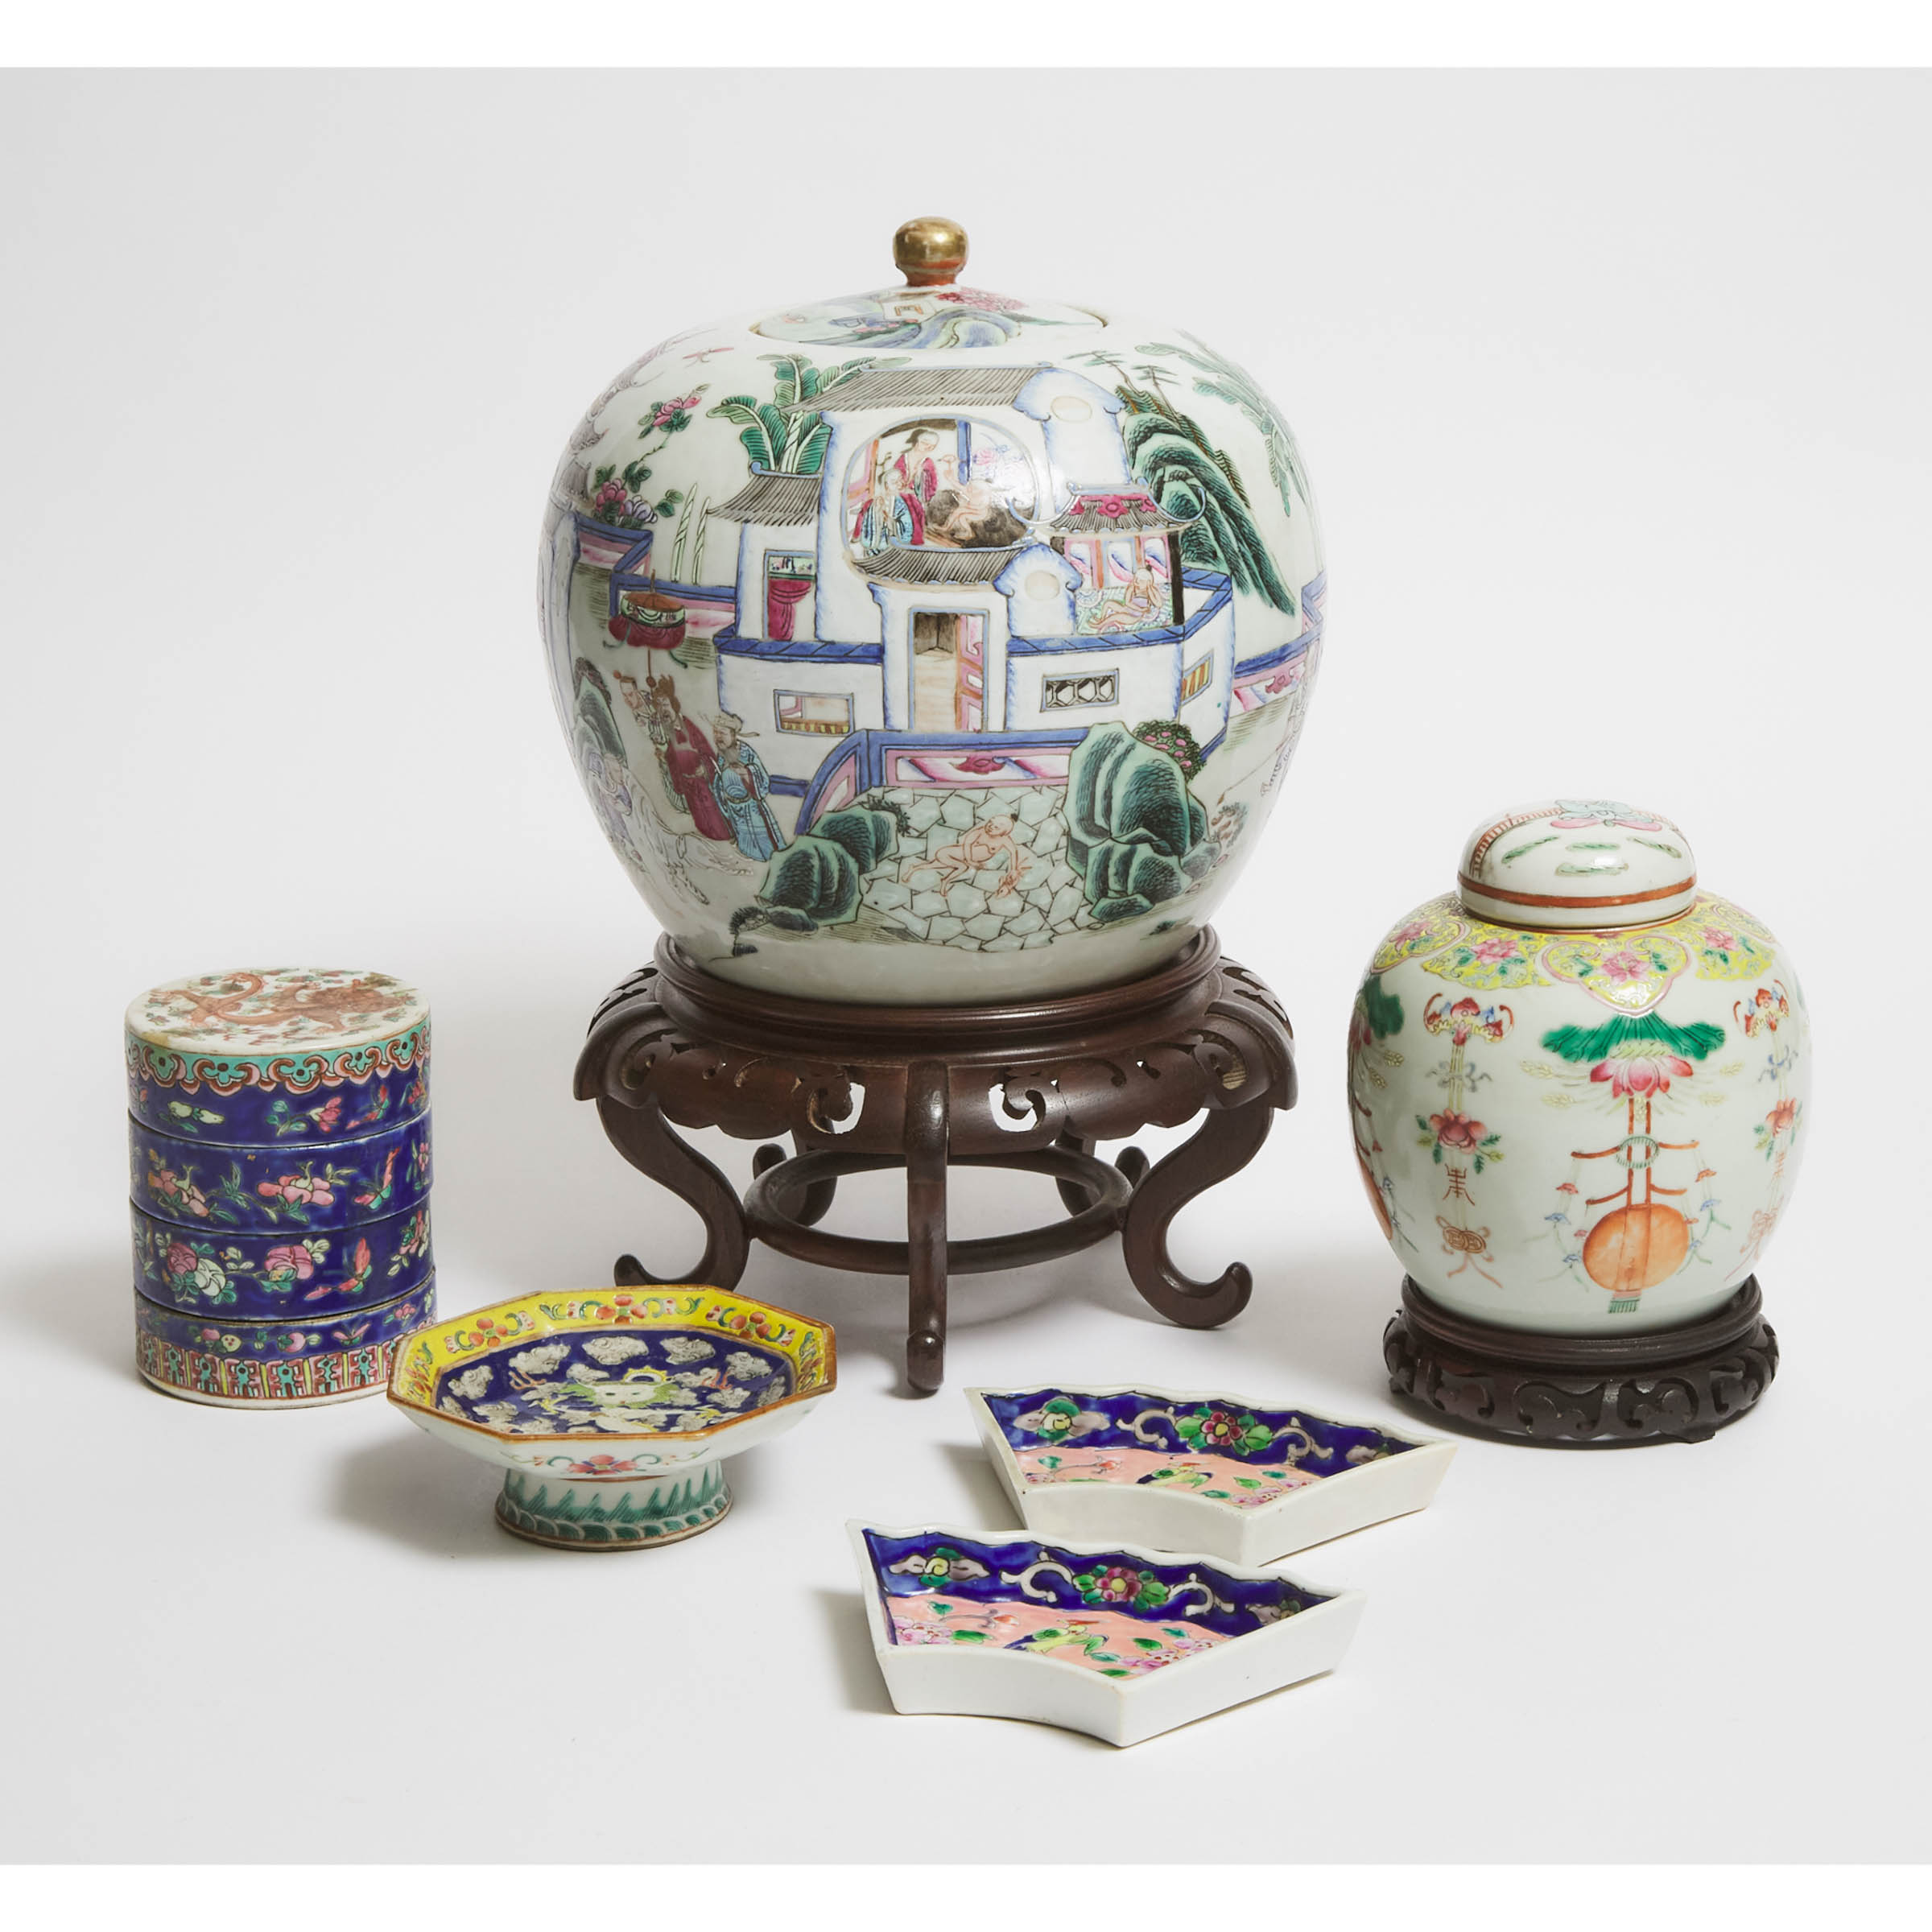 A Group of Six Famille Rose Porcelain Wares, Late Qing Dynasty